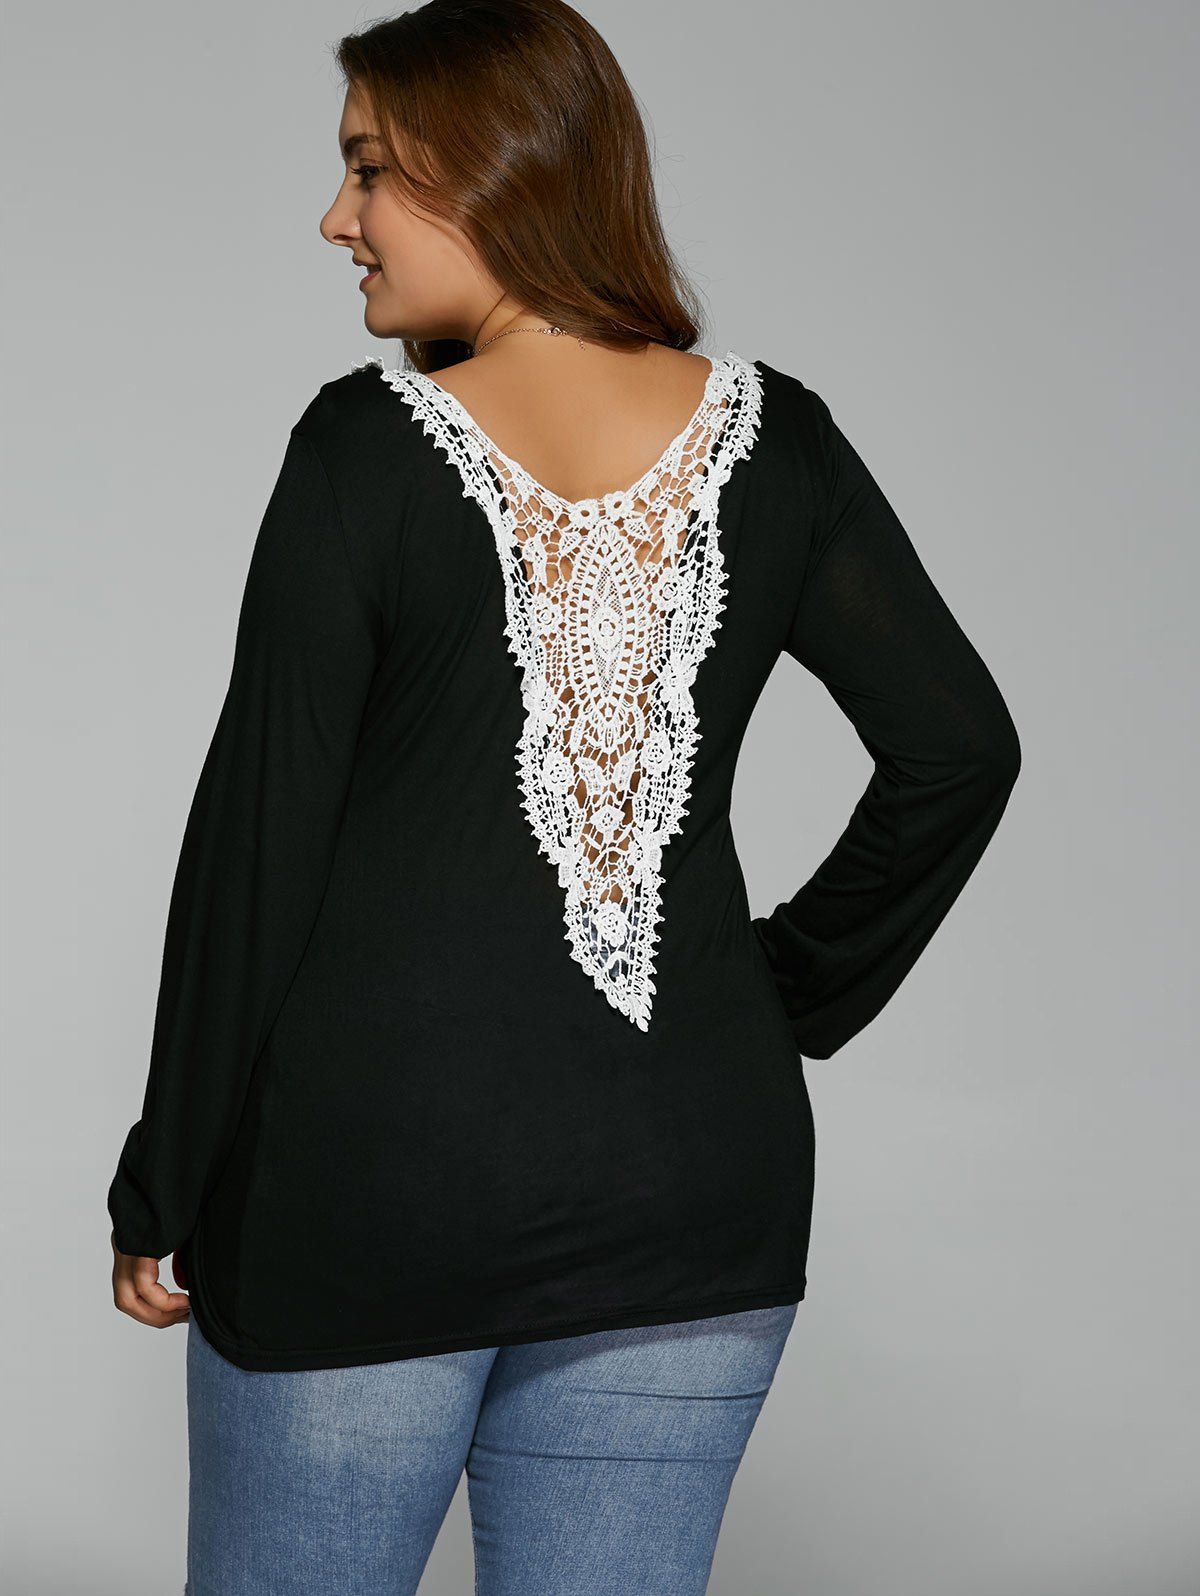 [17% OFF] 2021 Back Lacework Splicing Plus Size T-Shirt In BLACK ...